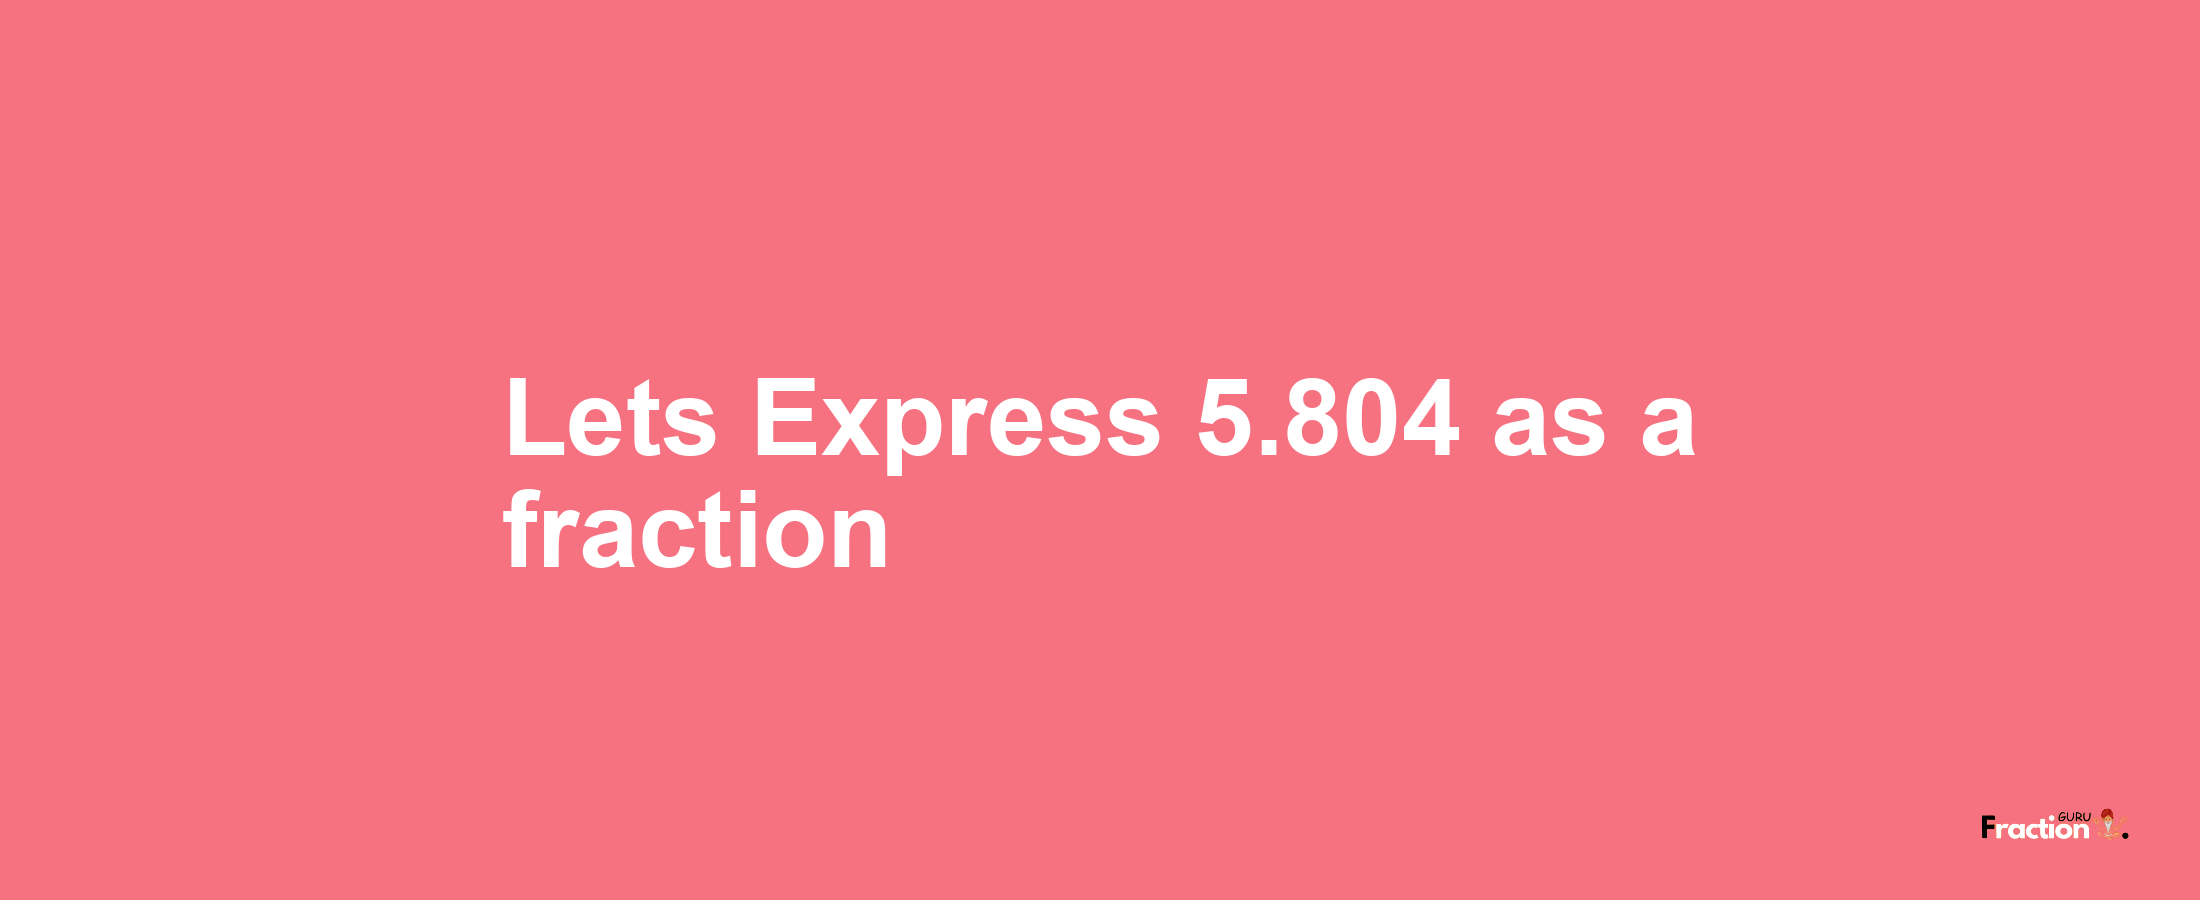 Lets Express 5.804 as afraction